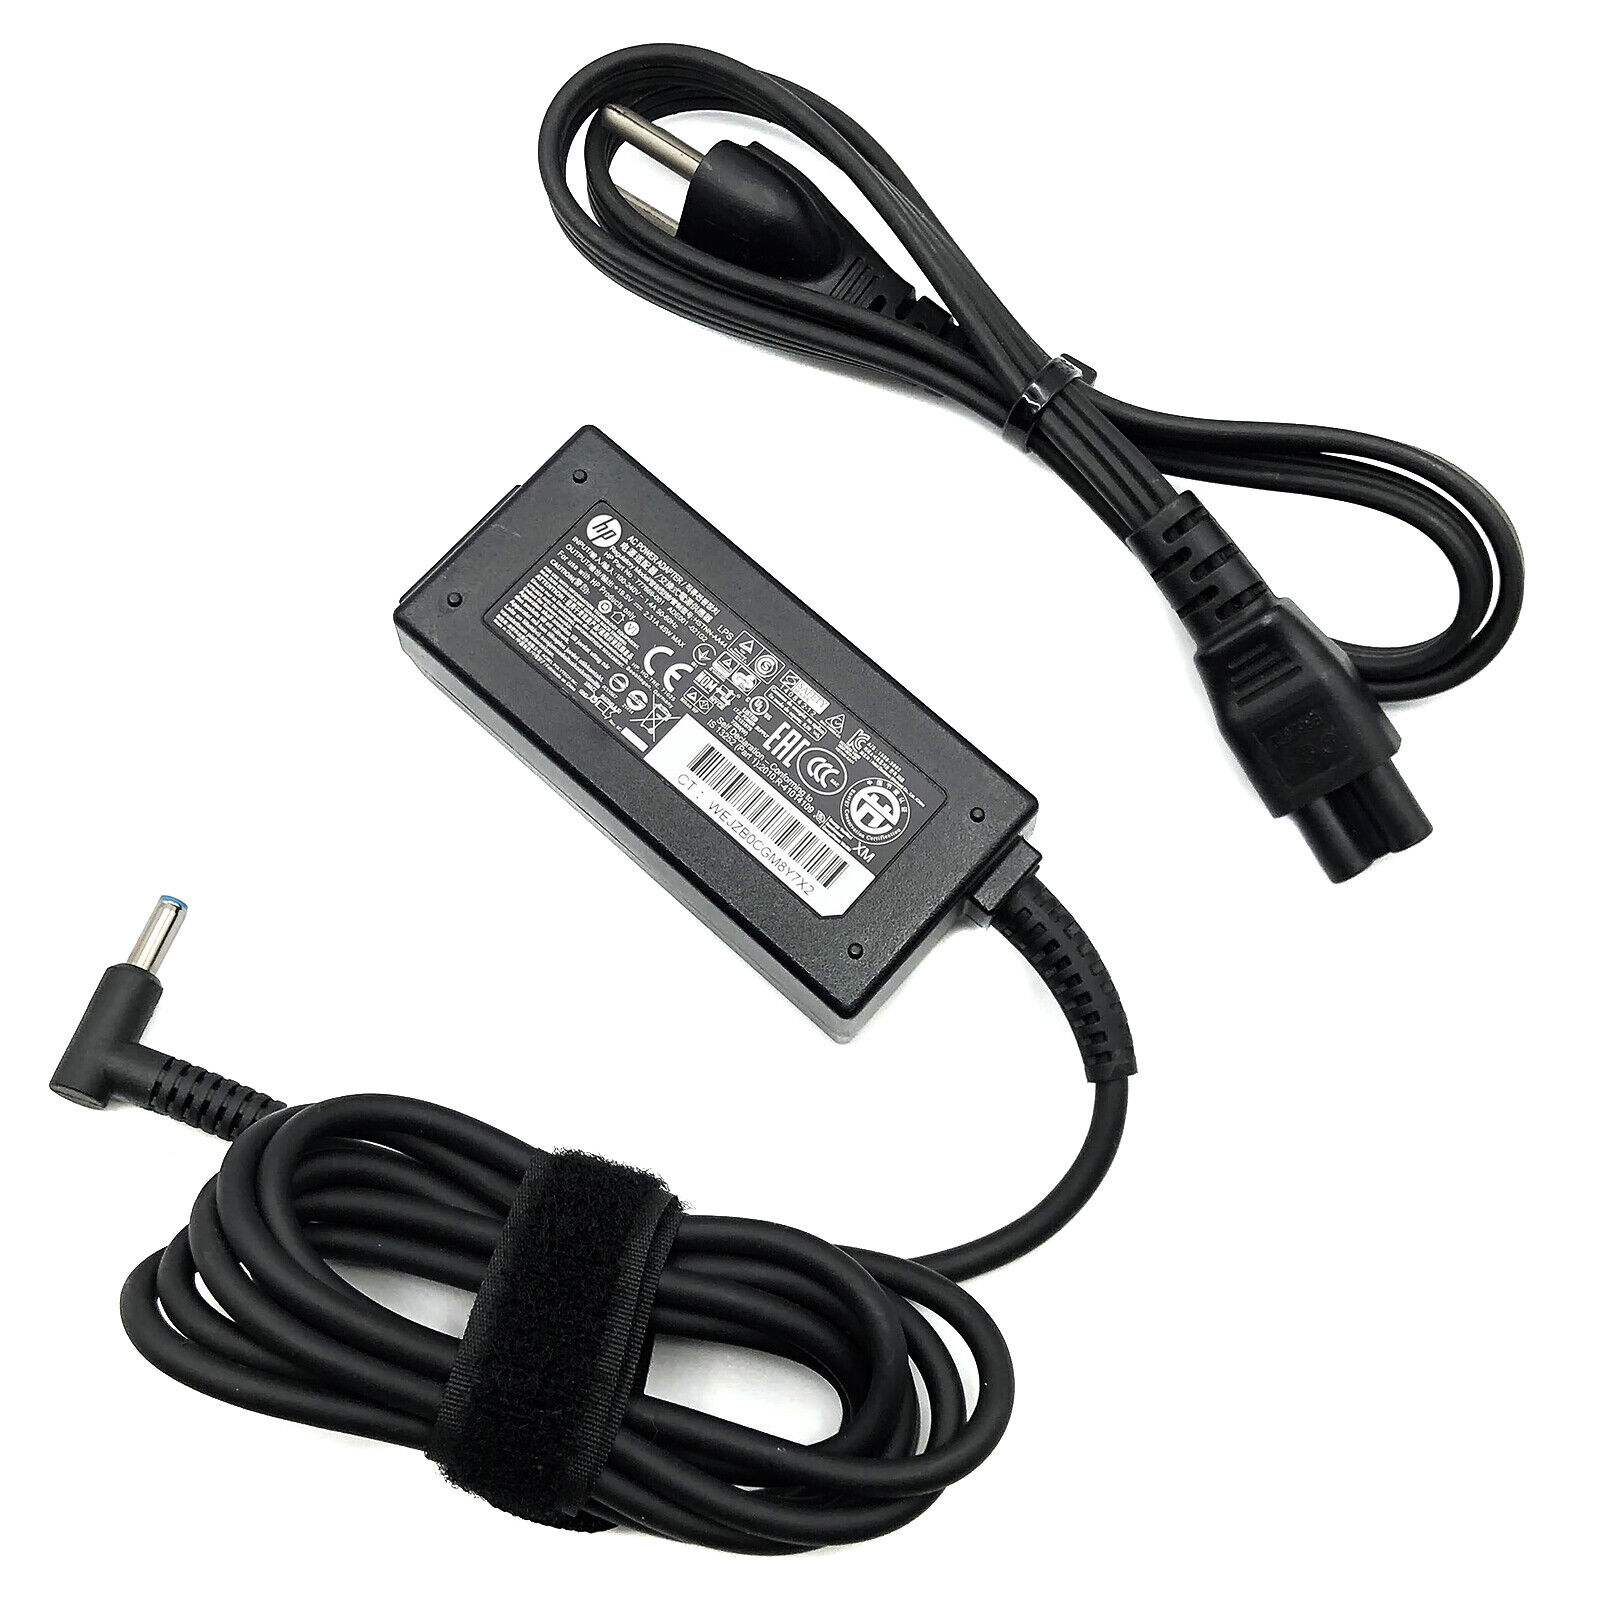 Original 45W HP AC Adapter 19.5V Charger for HP t430 t530 t638 t640 Thin Client